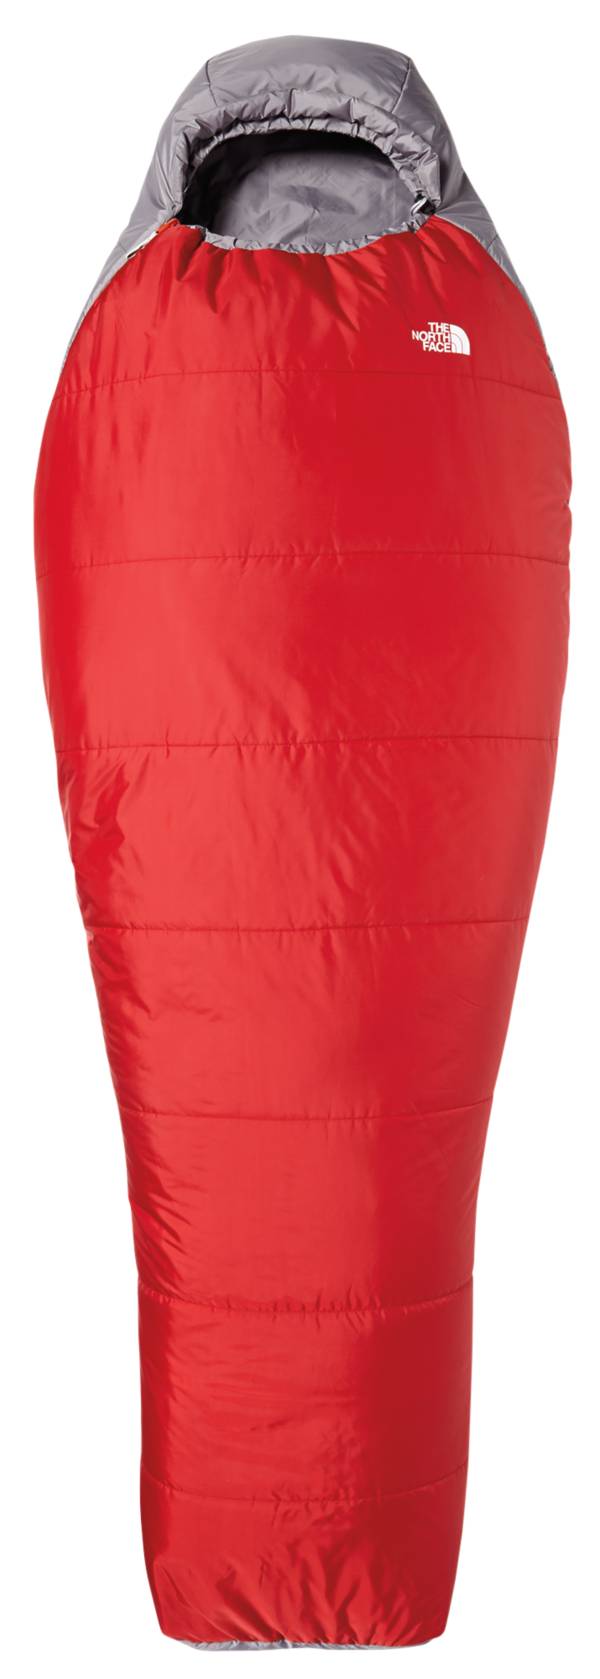 The North Face Wasatch 40° Sleeping Bag product image